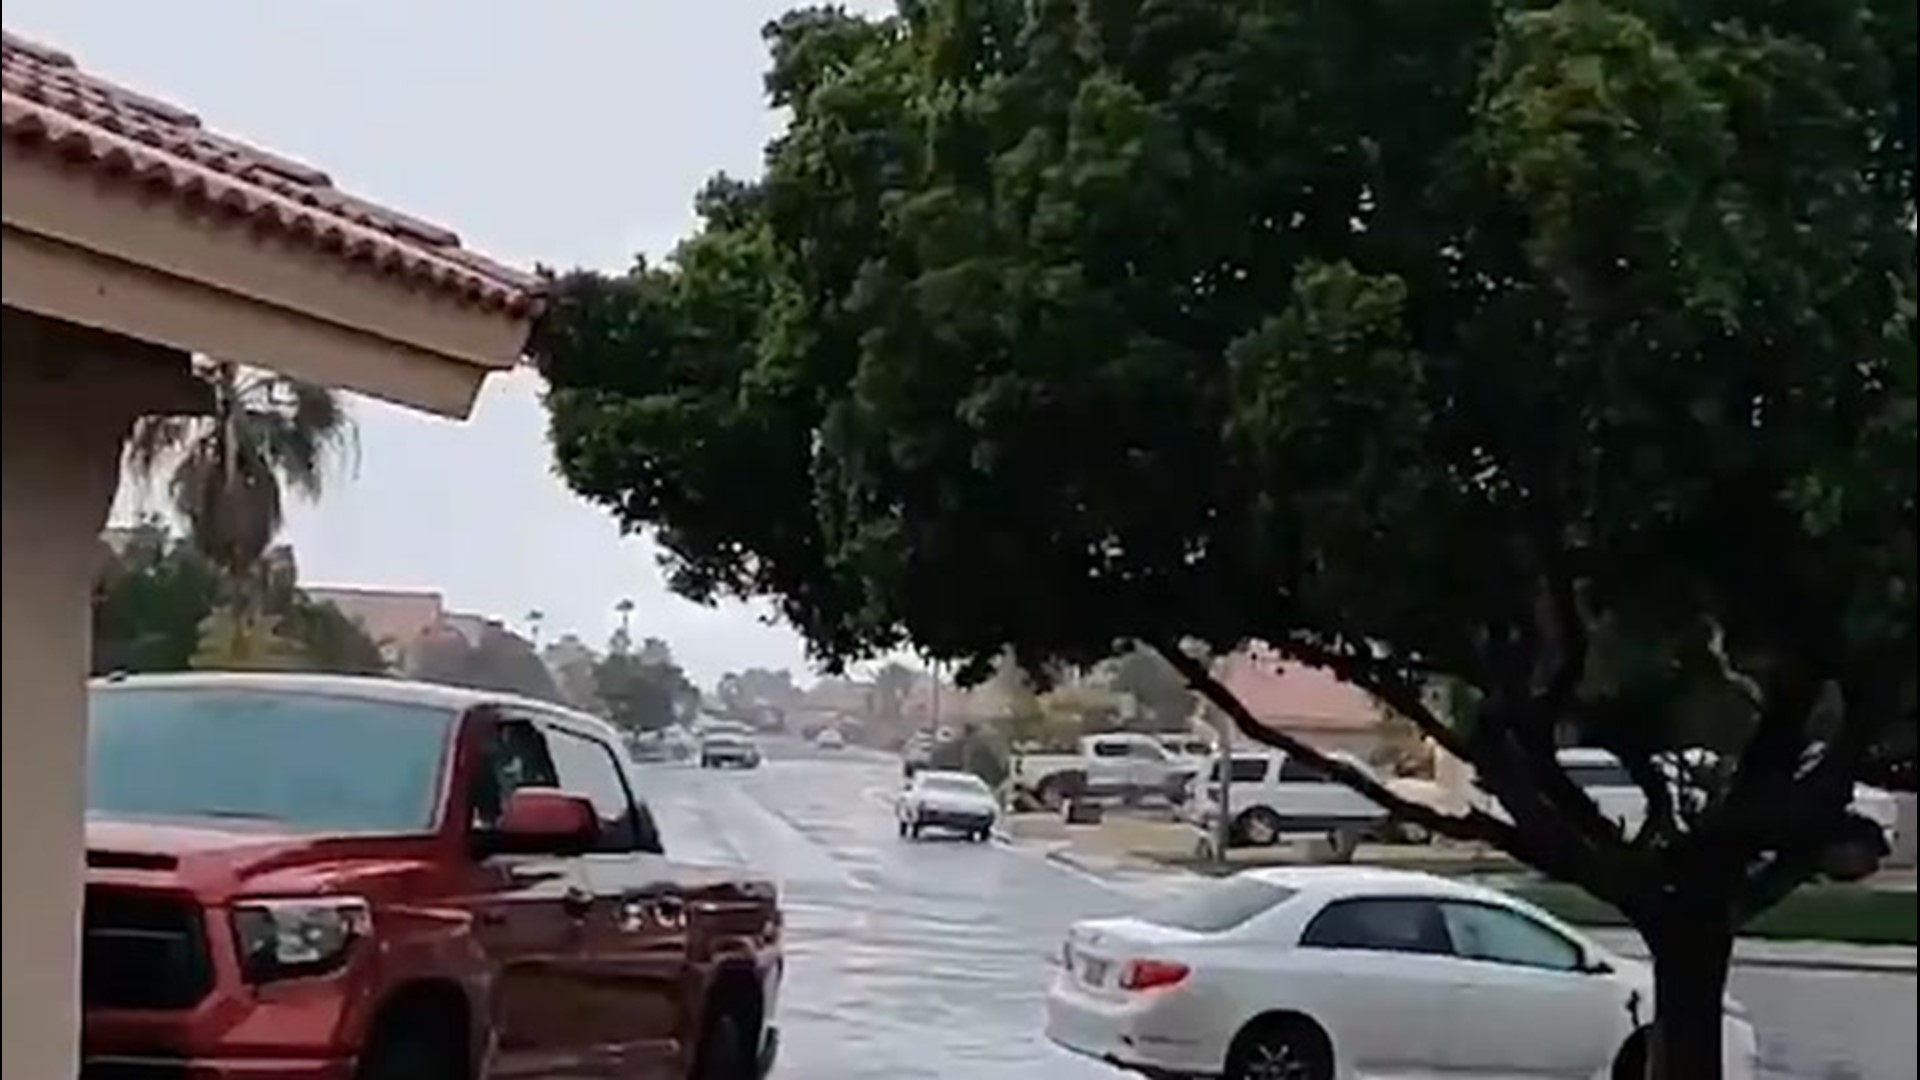 A thunderstorm roared through El Centro, California, as part of a storm cell moved through Southern California on Jan. 23.